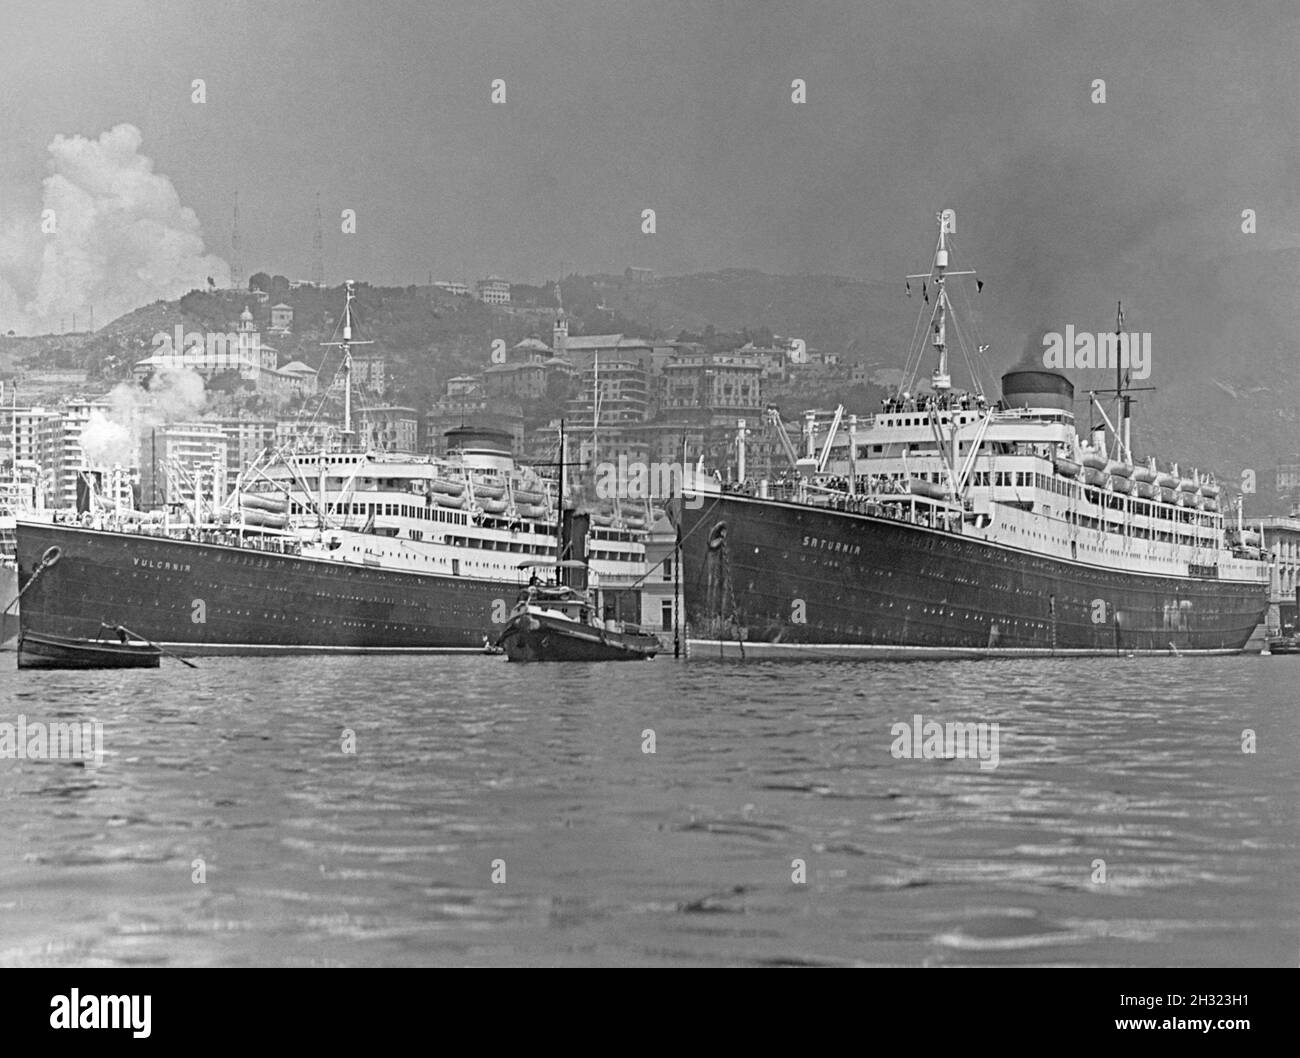 The harbour of Trieste, Italy in the 1930s. Two ocean liners are in port – sister ships the MS Saturnia (left) and MS Vulcania (right), which, with smoke billowing and a tug assisting, is about to leave port. MS Saturnia was an Italian ocean liner launched in 1925. She was sister ship MS Vulcania, launched the next year – a vintage 1930s photograph. Stock Photo